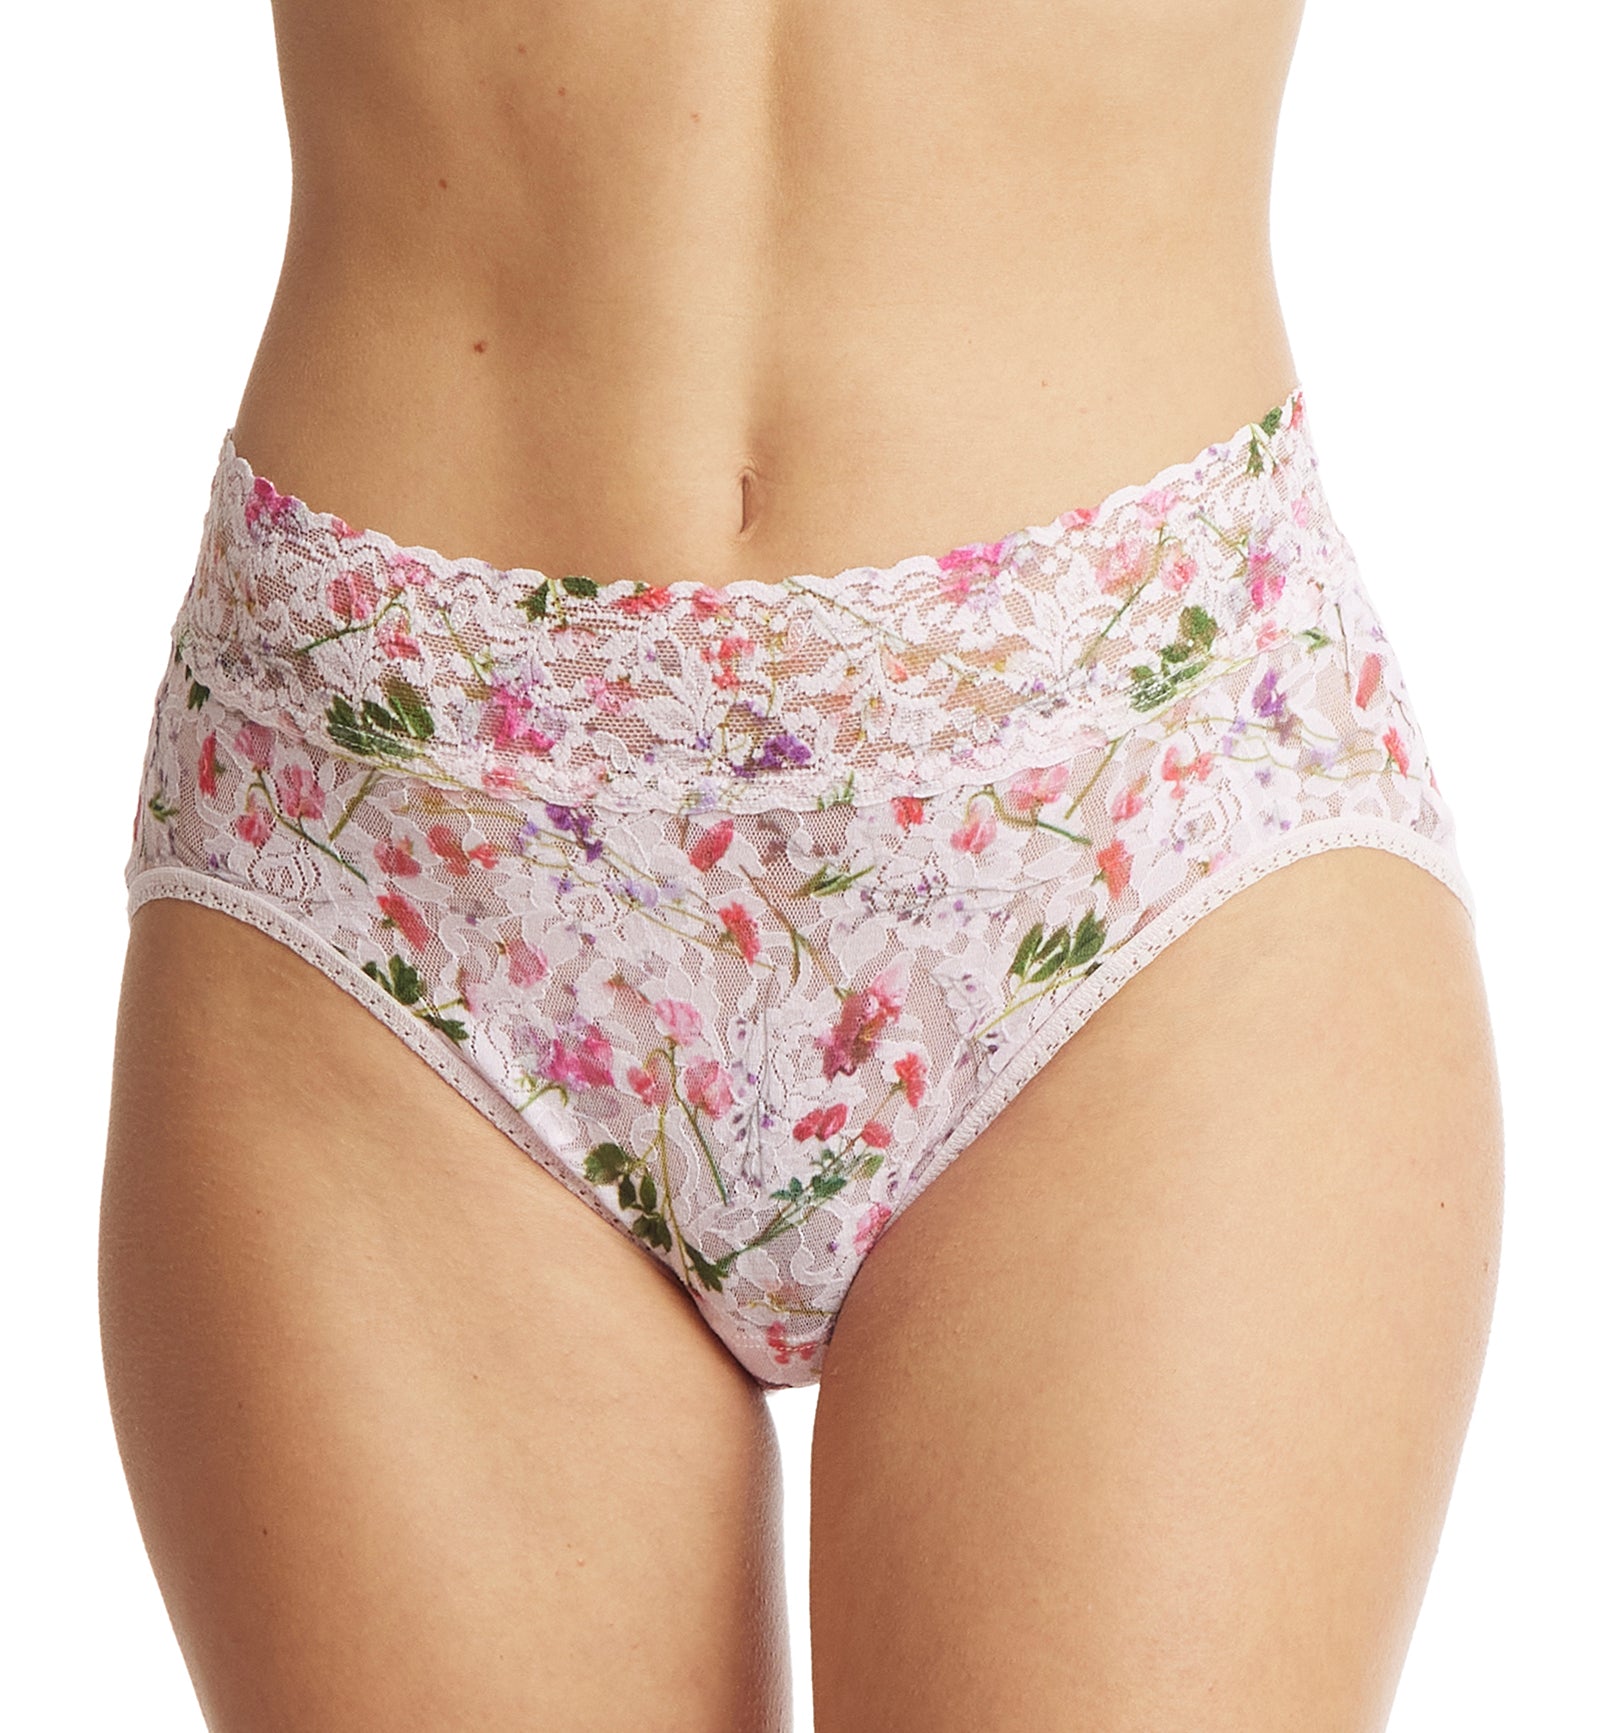 Hanky Panky Signature Lace Printed French Brief (PR461),Medium,Rise and Vines - Rise and Vines,Medium